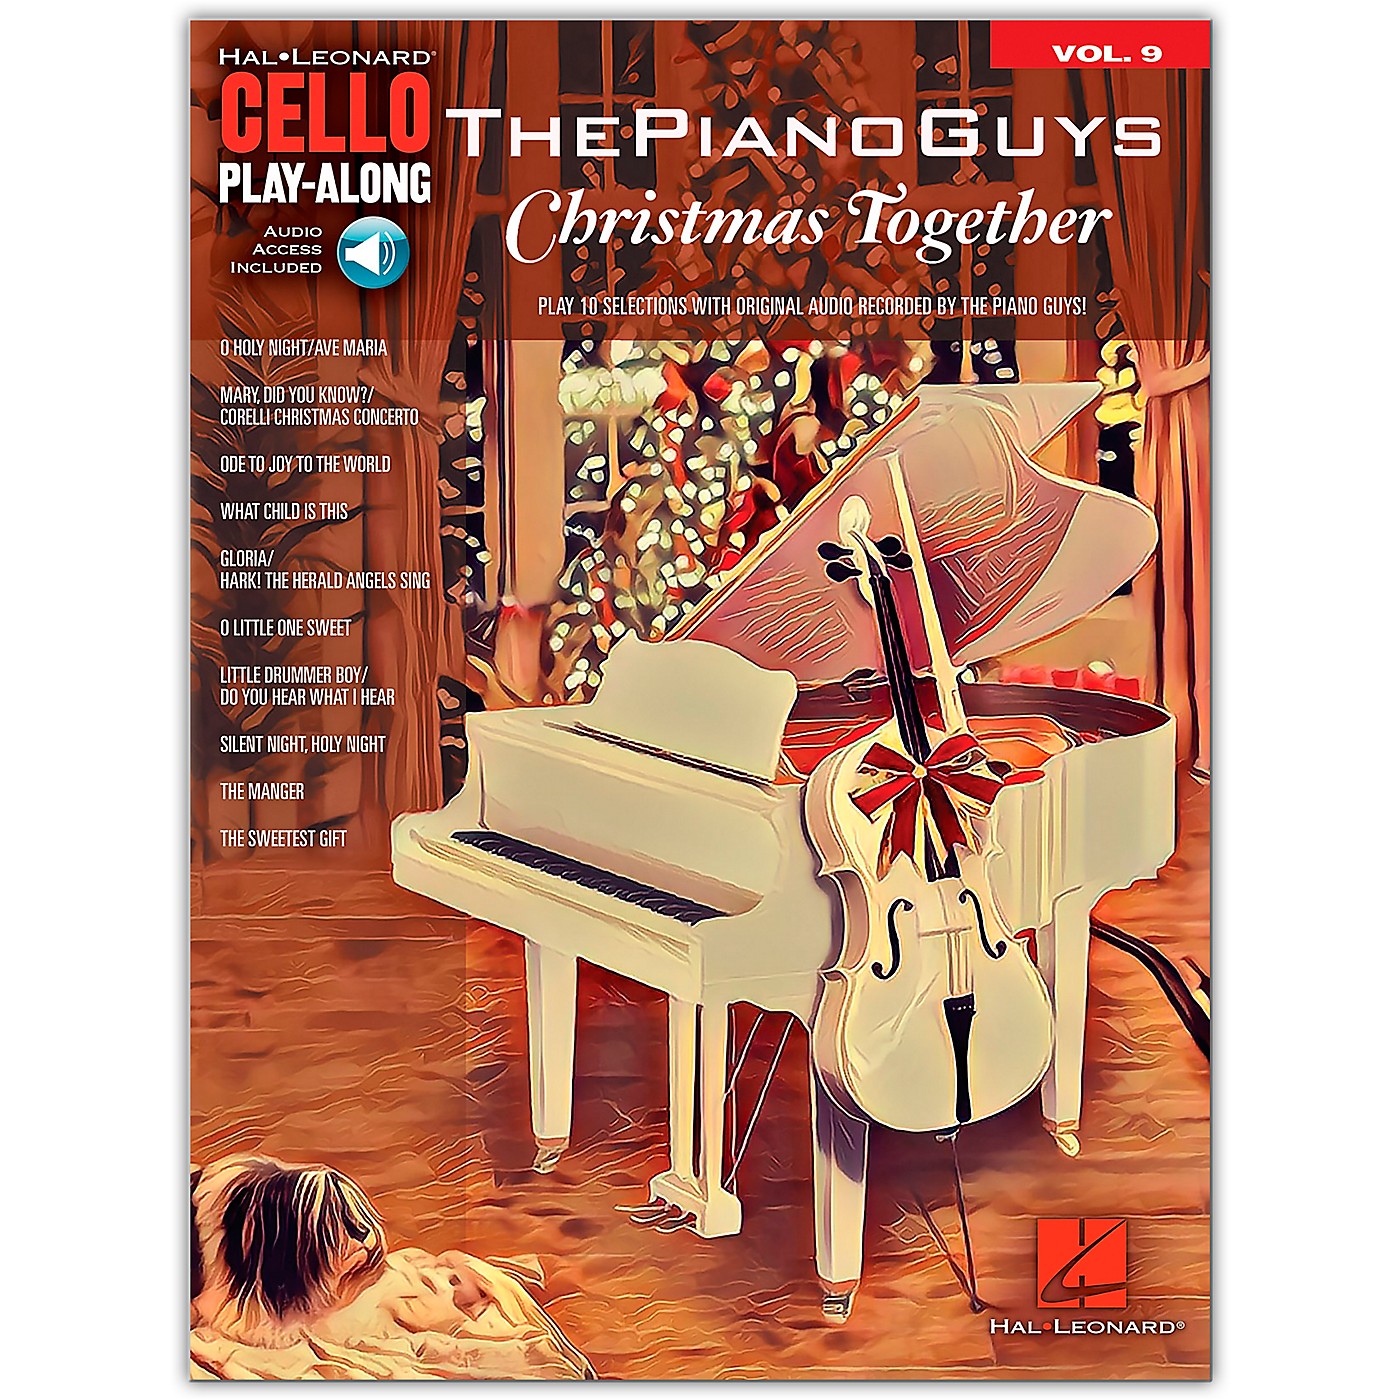 Hal Leonard The Piano Guys-Christmas Together Cello Play-Along Volume 9 Book/Audio Online thumbnail